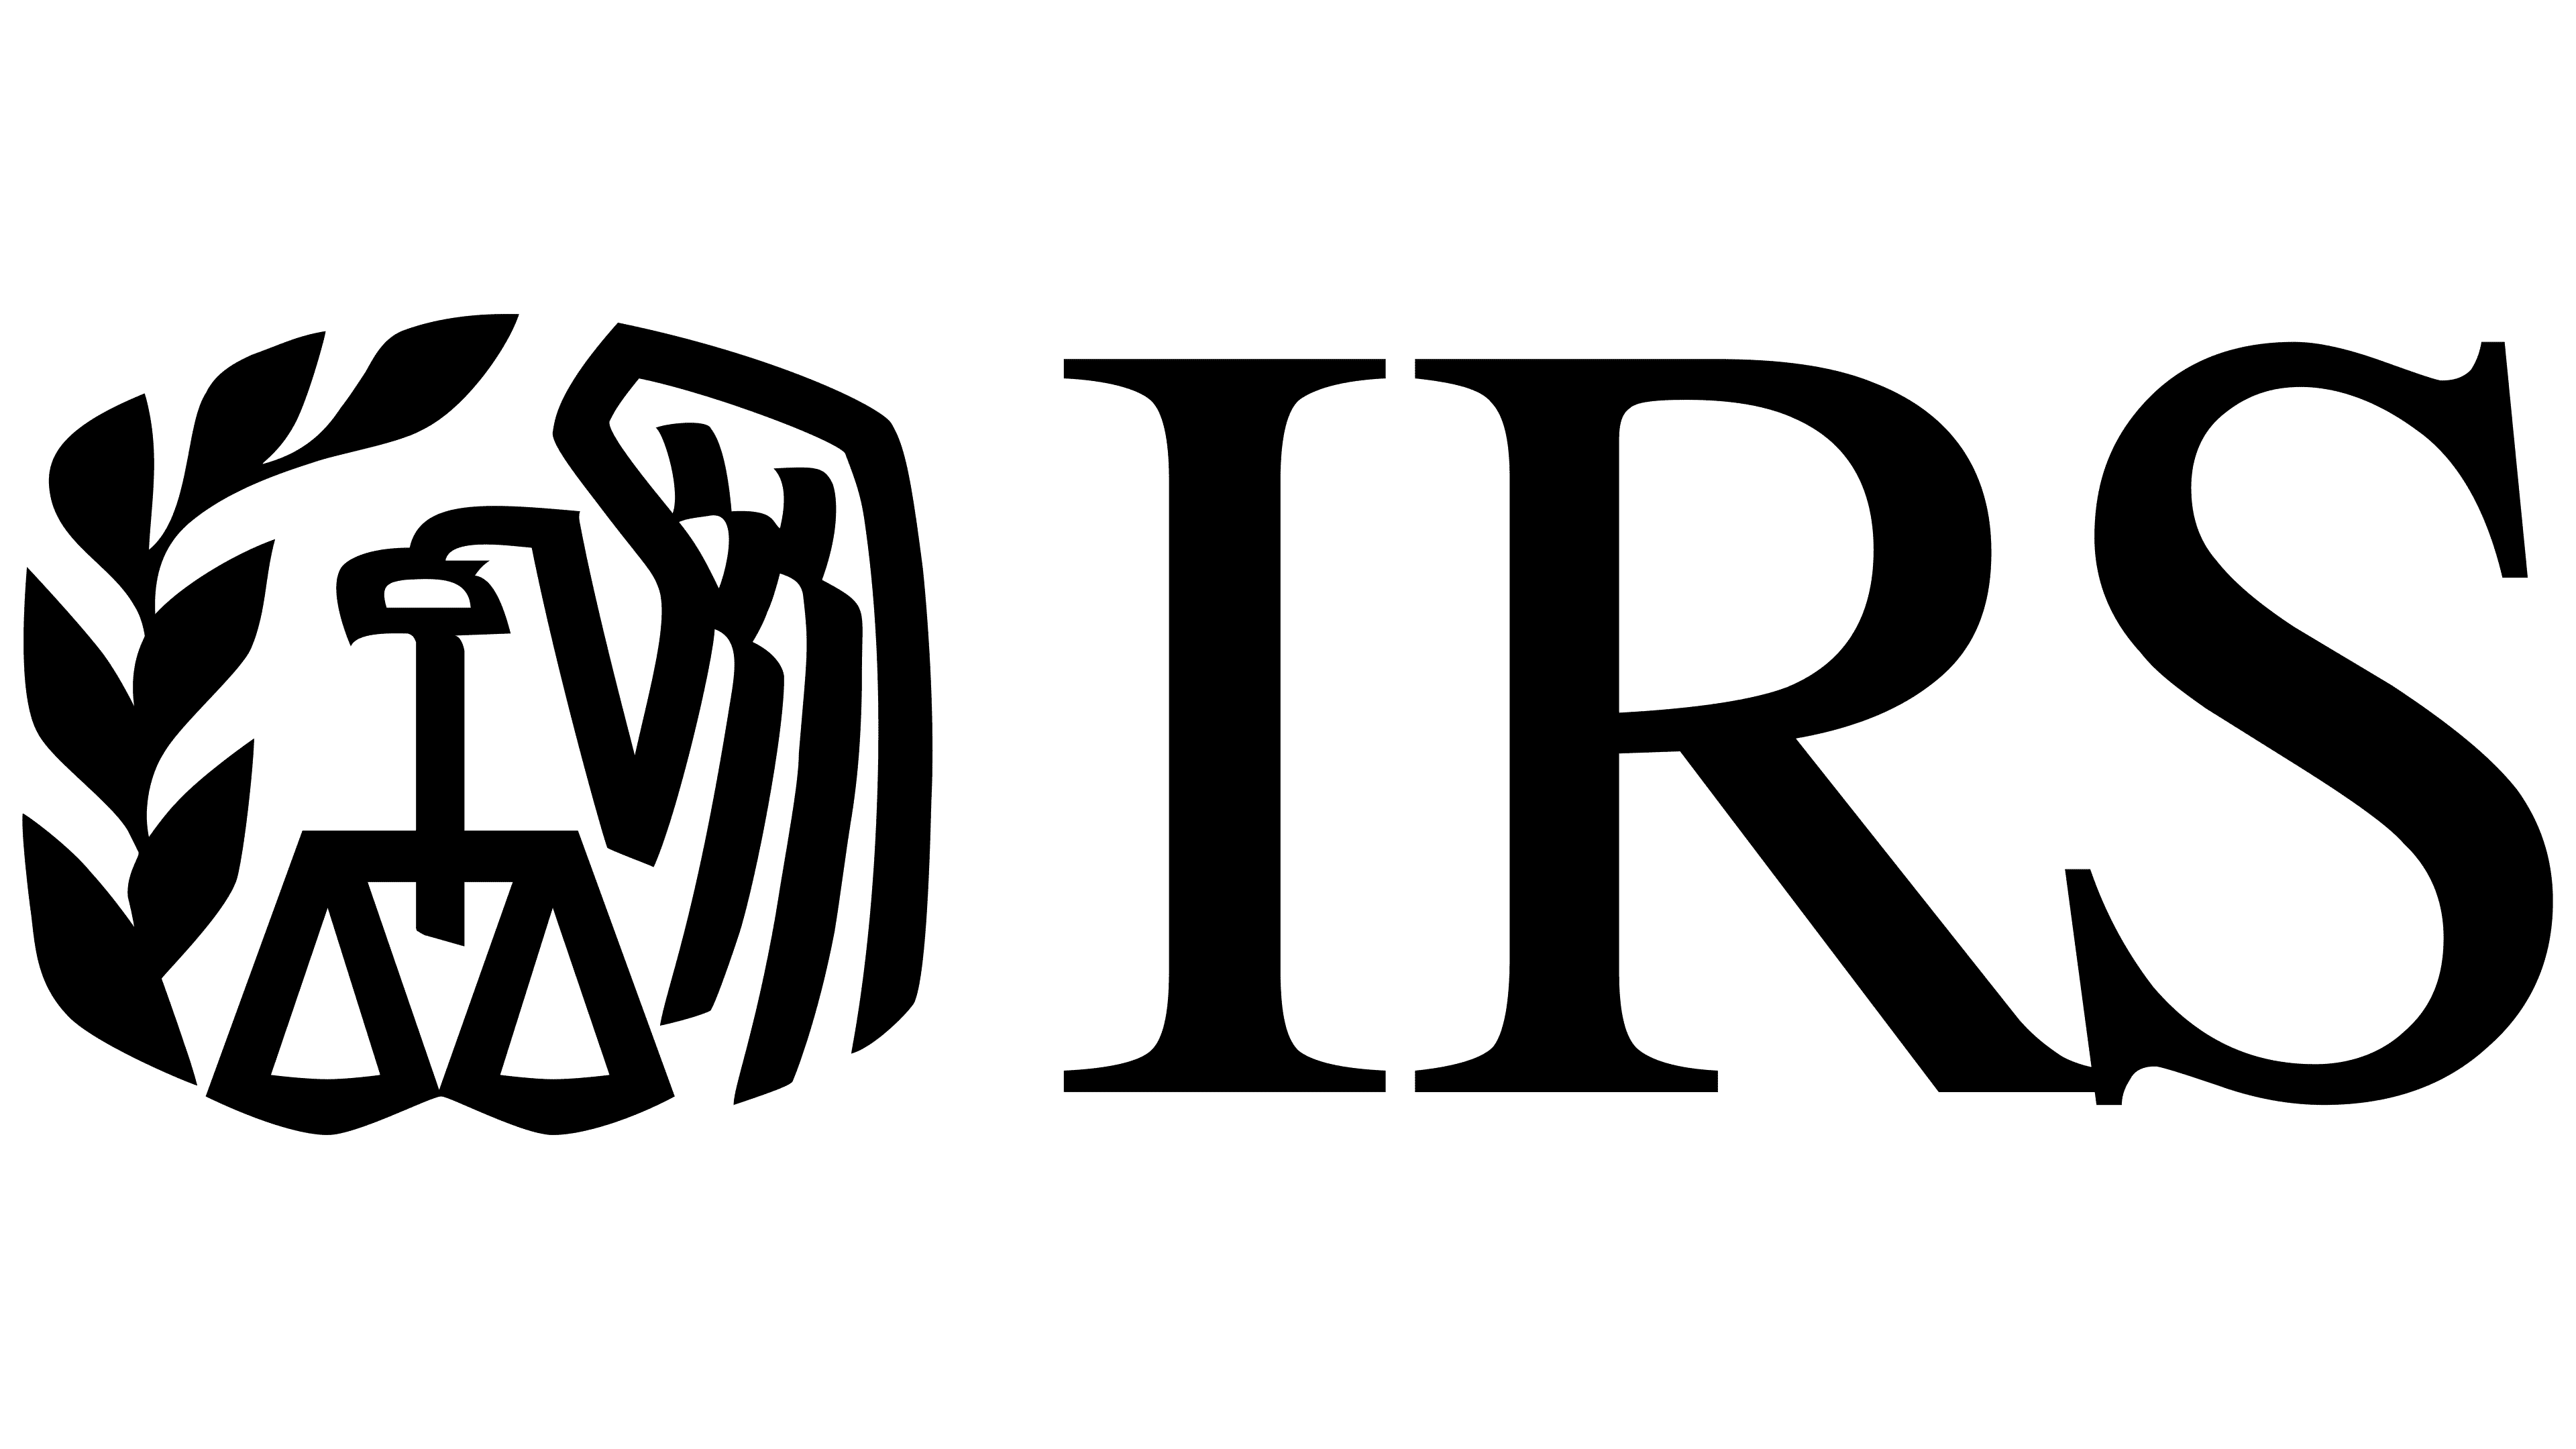 Subcontracting to IRS Support